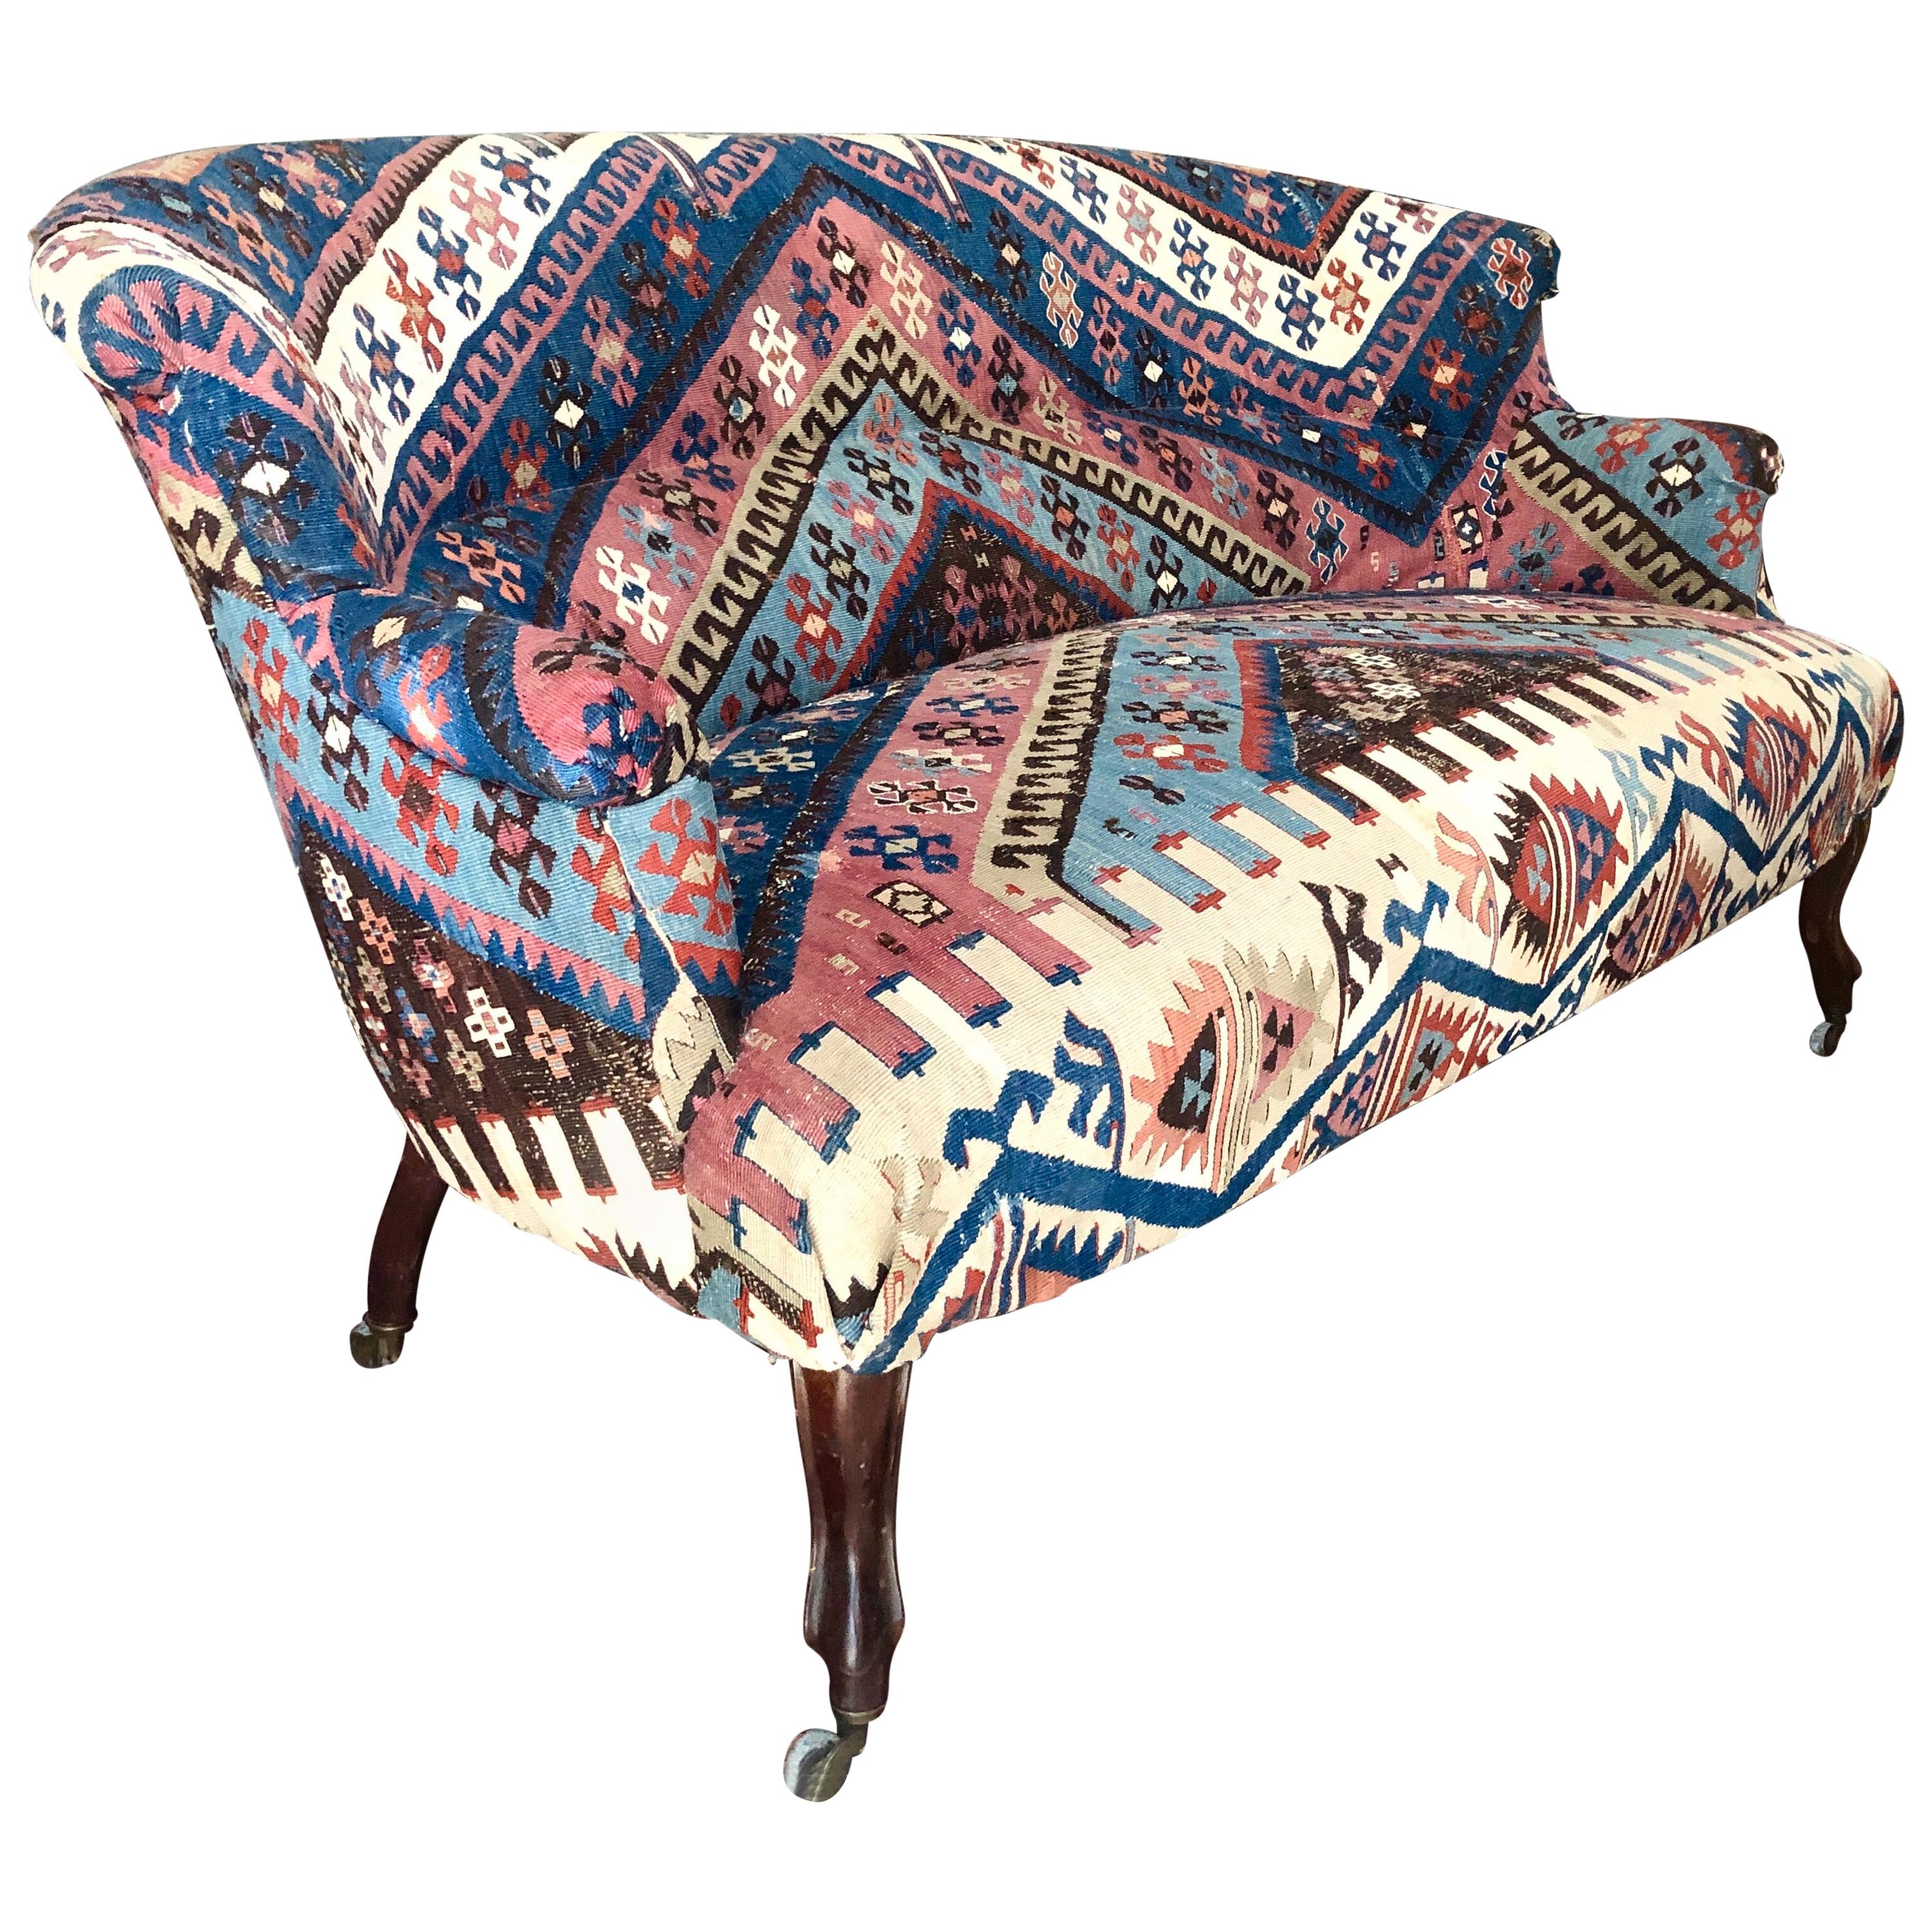 20th Century French Two-Seated Canapé Upholstered with an Antique Wool Carpet